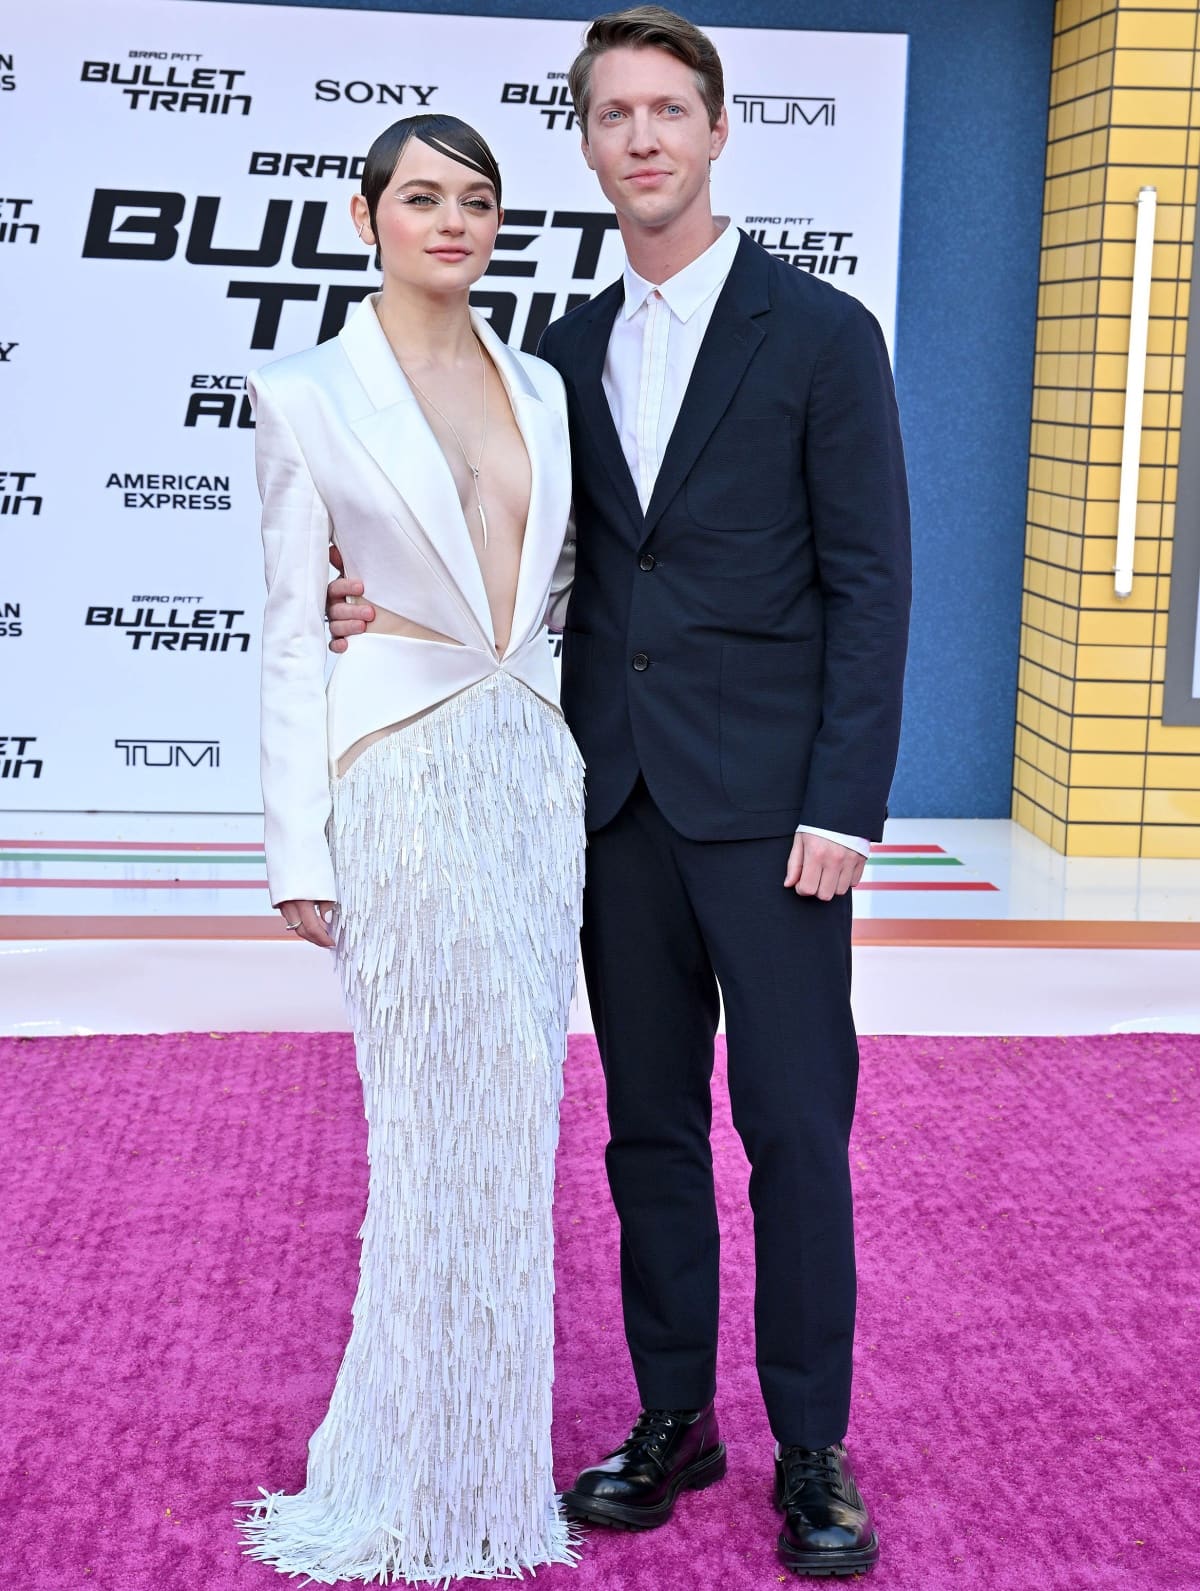 Joey King and Steven Piet making their red carpet debut as an engaged couple